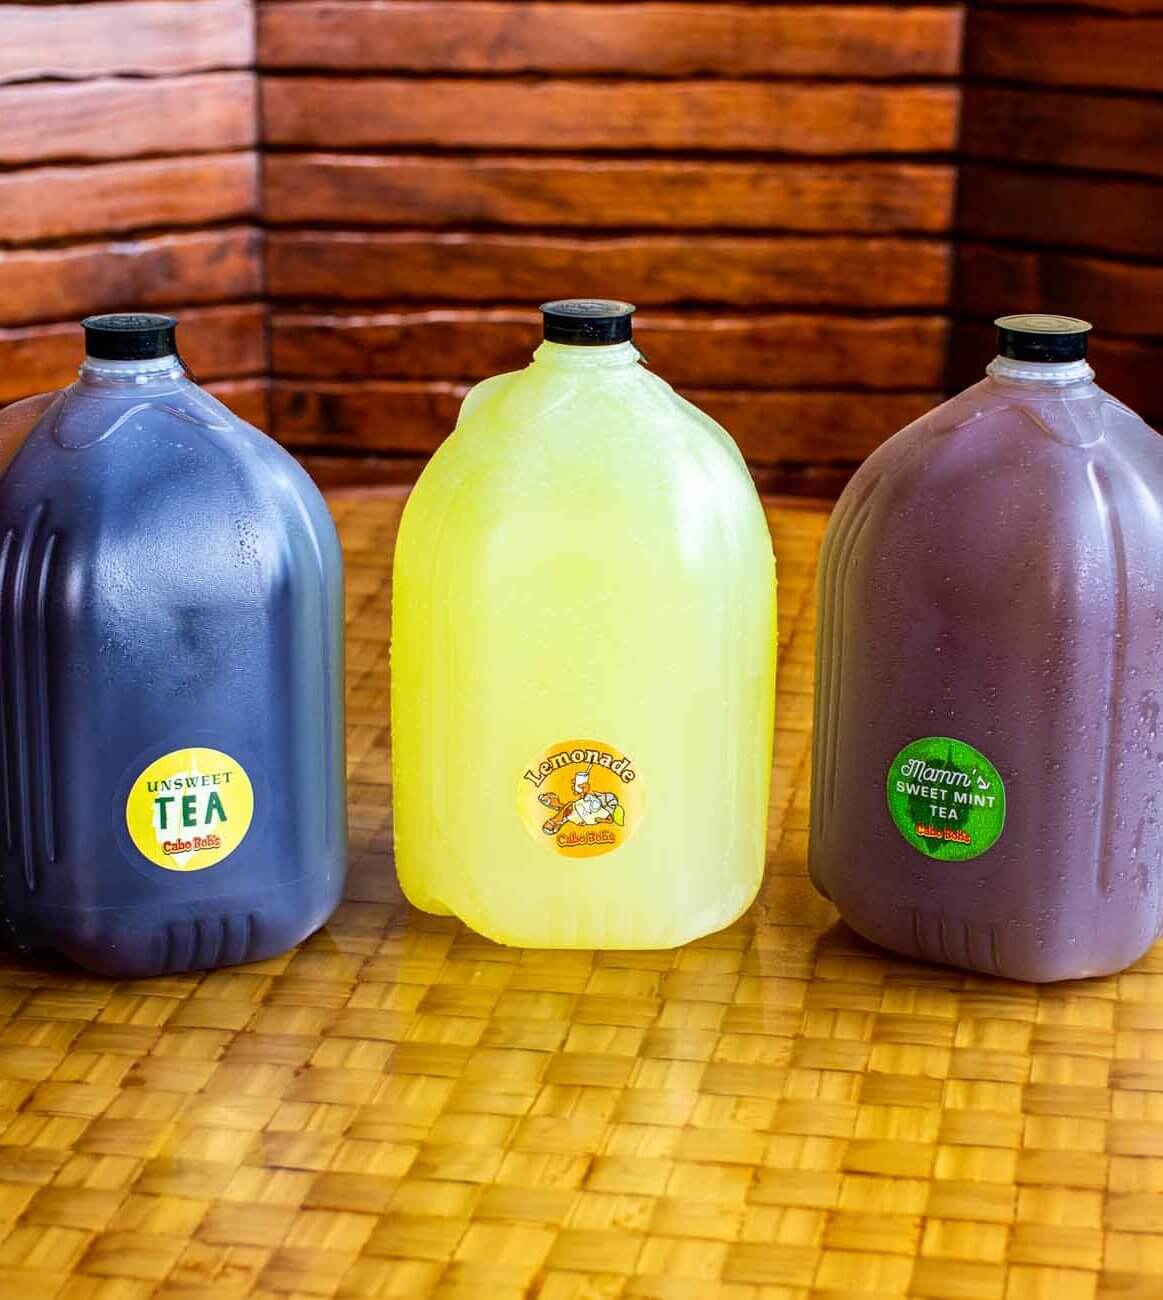 Three gallon jugs. One has a blue liquid in it, one purple, and one yellow.